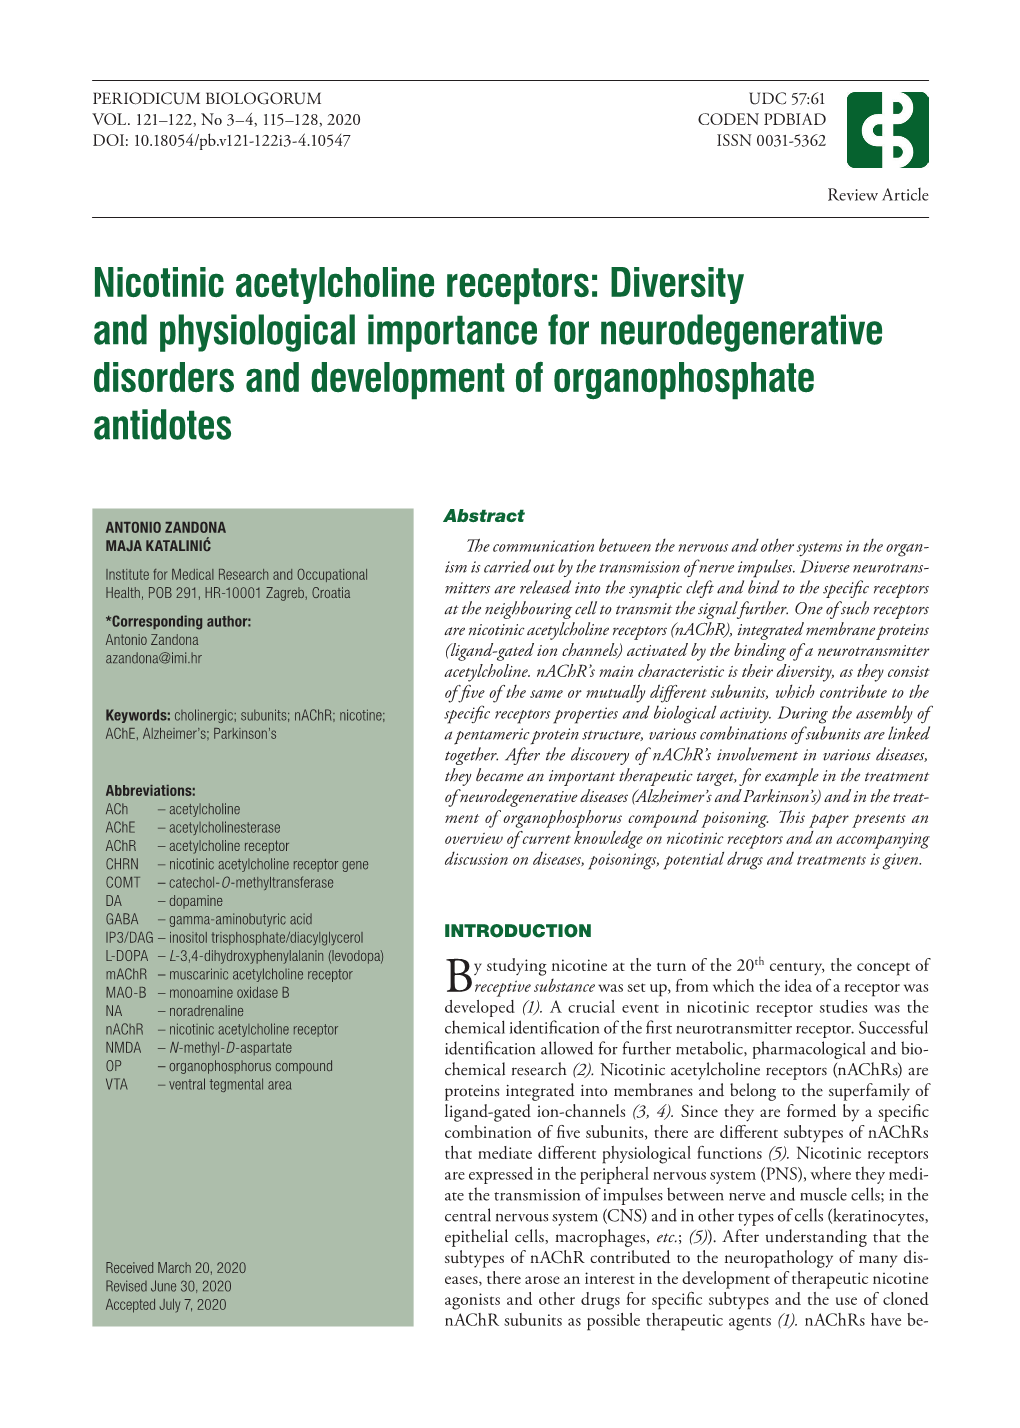 Nicotinic Acetylcholine Receptors: Diversity and Physiological Importance for Neurodegenerative Disorders and Development of Organophosphate Antidotes